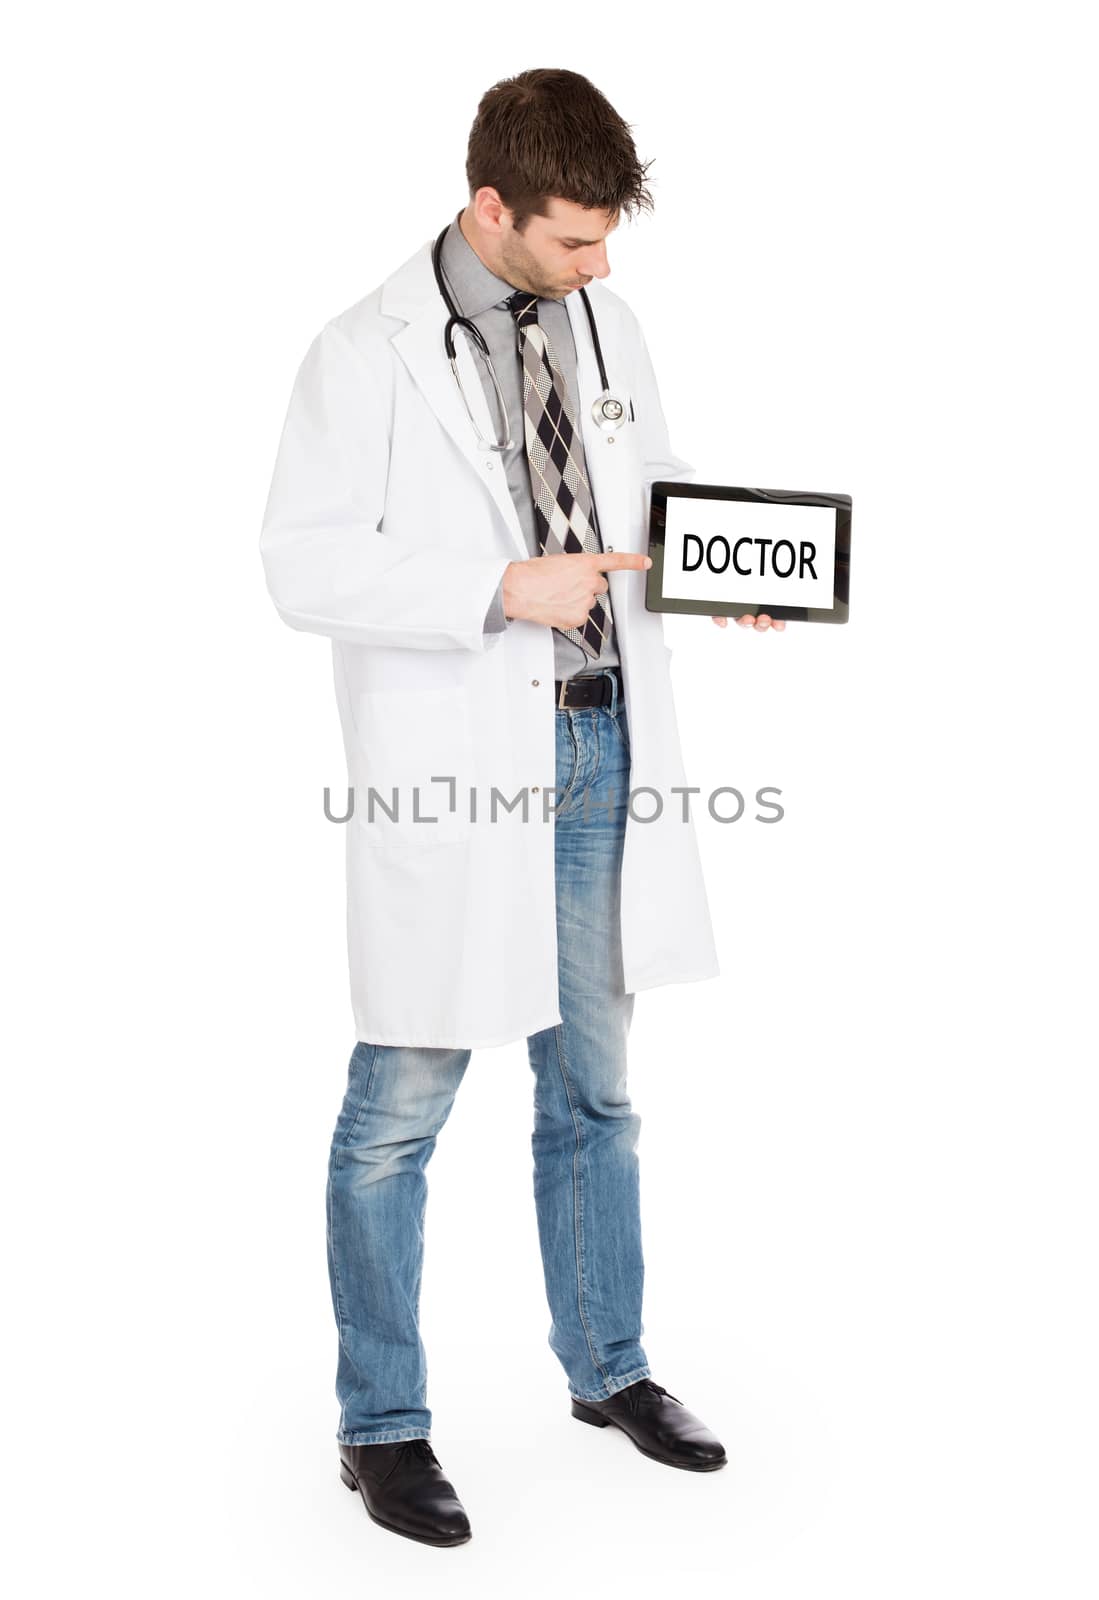 Doctor holding tablet - Doctor by michaklootwijk